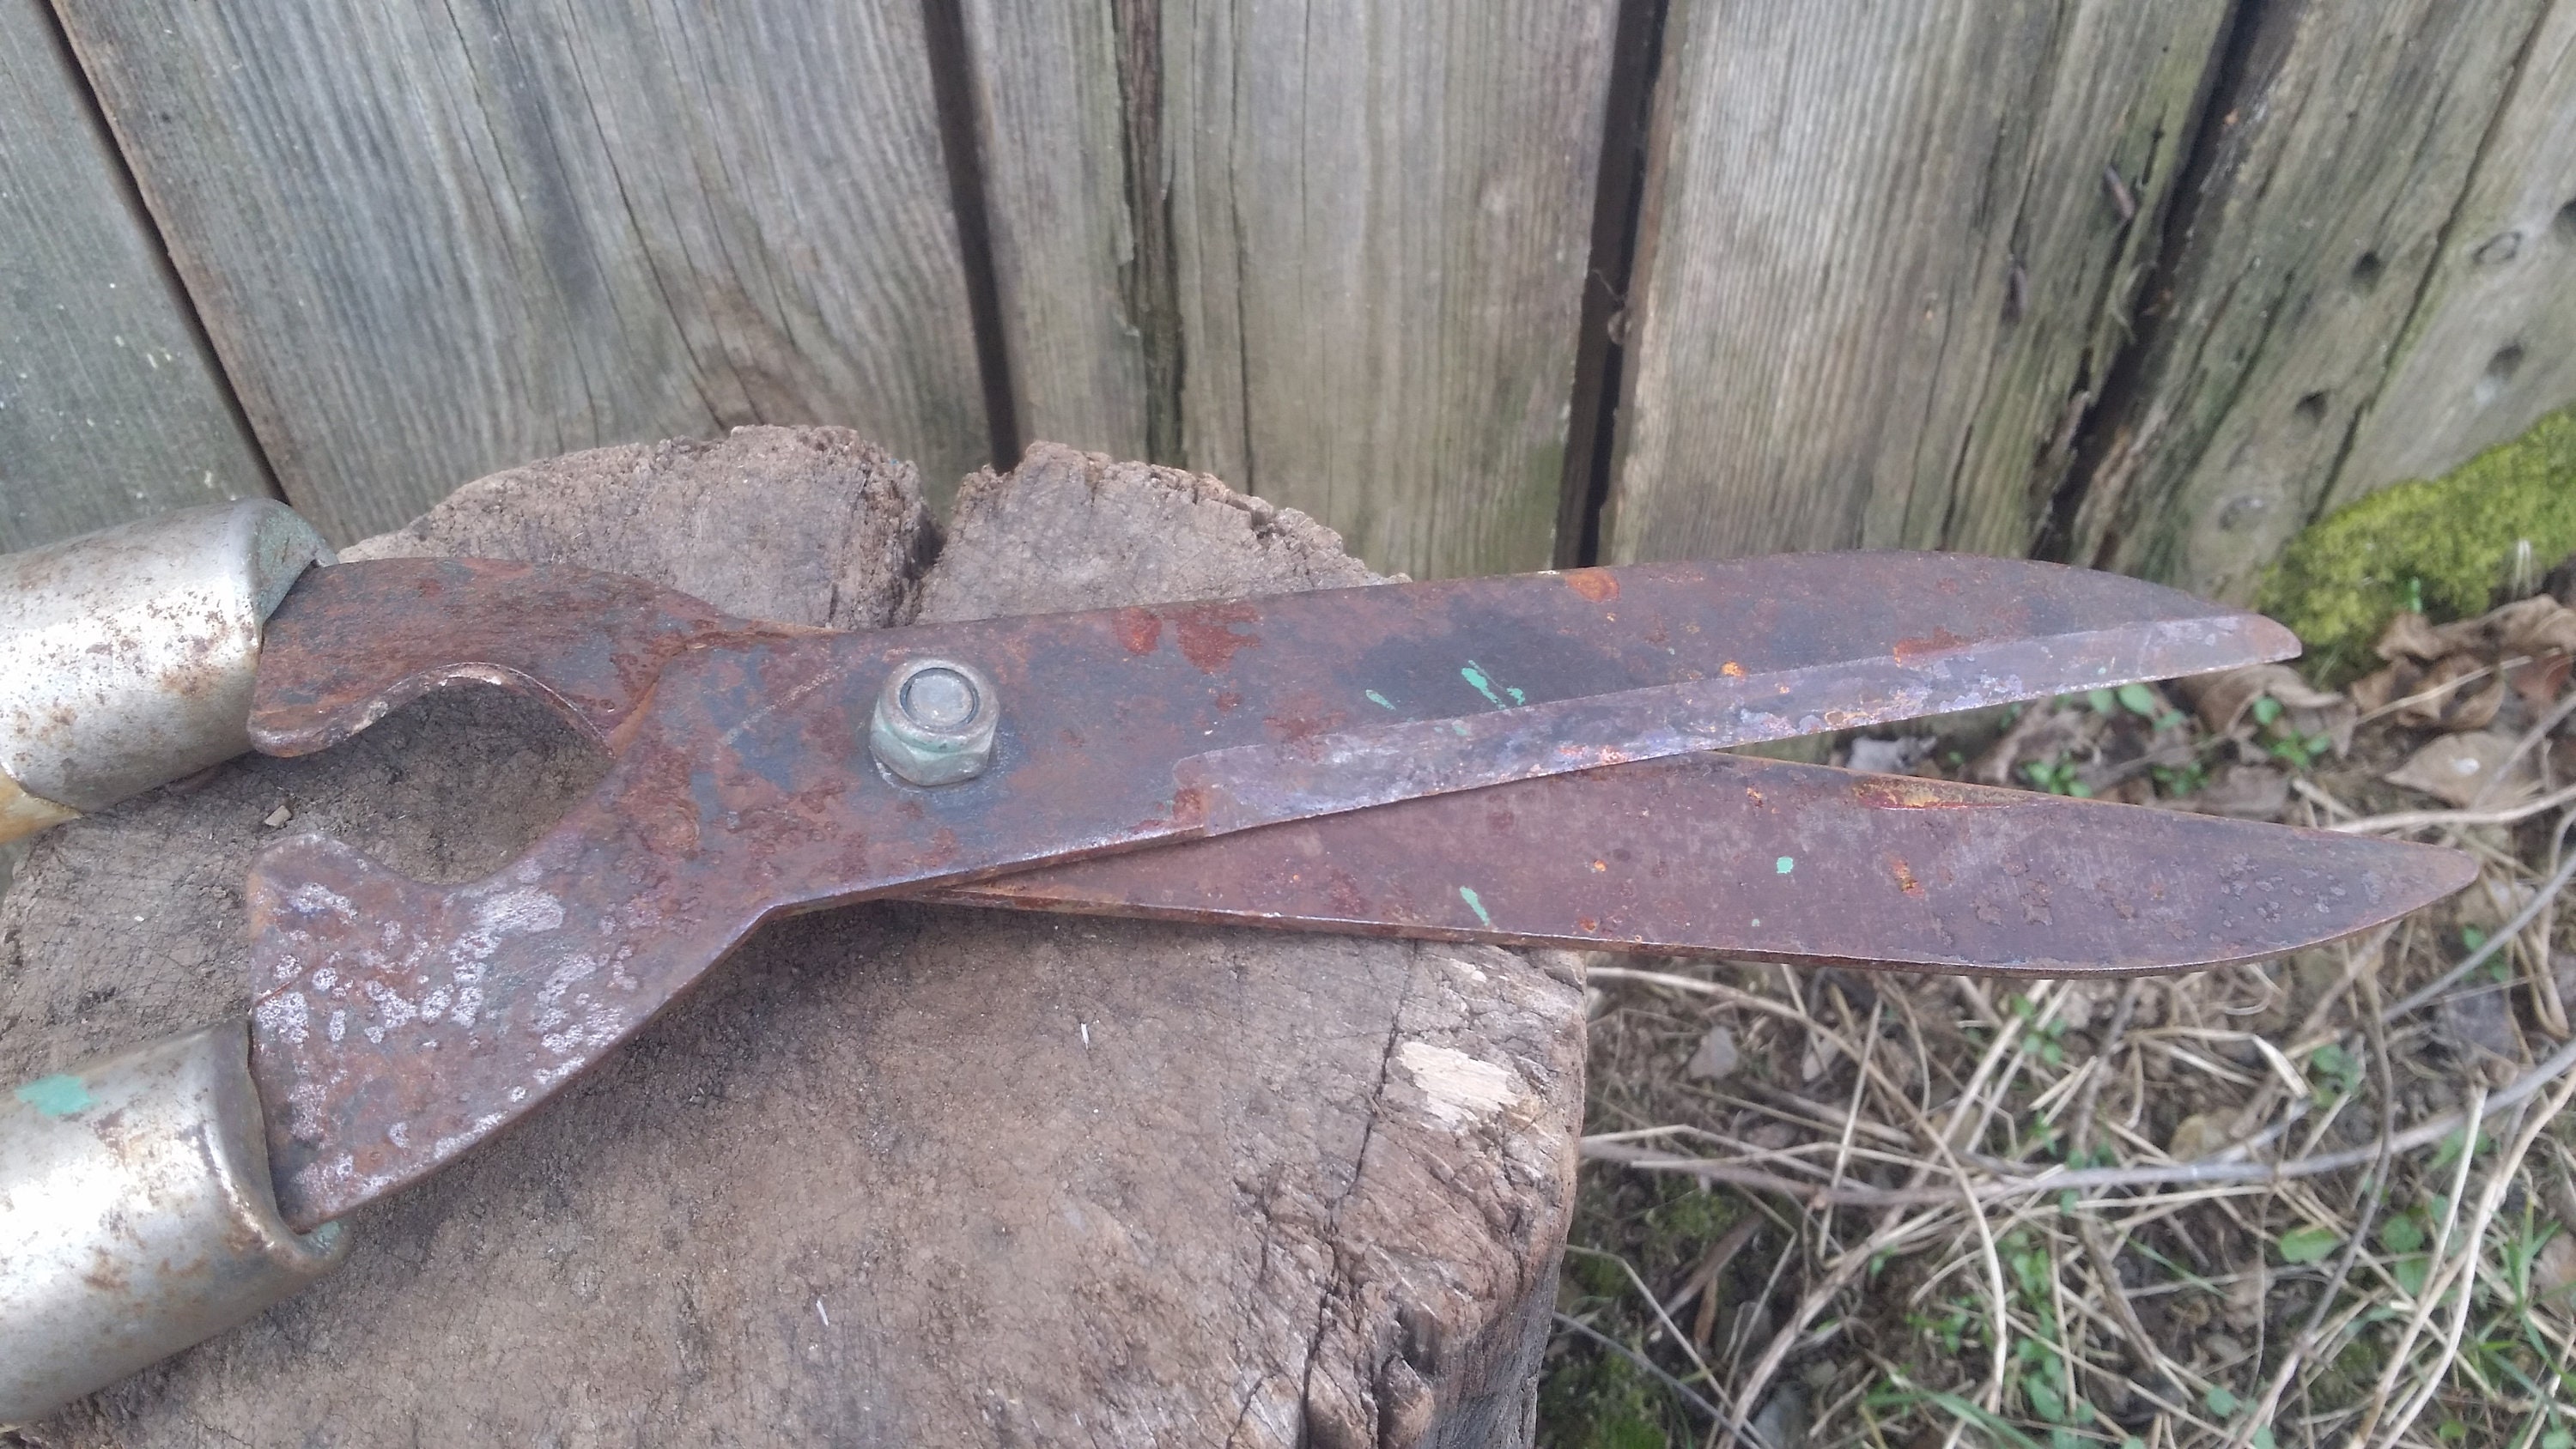 Rusty Garden Shears, Rustic Shears, Old Grass Clippers, Vintage